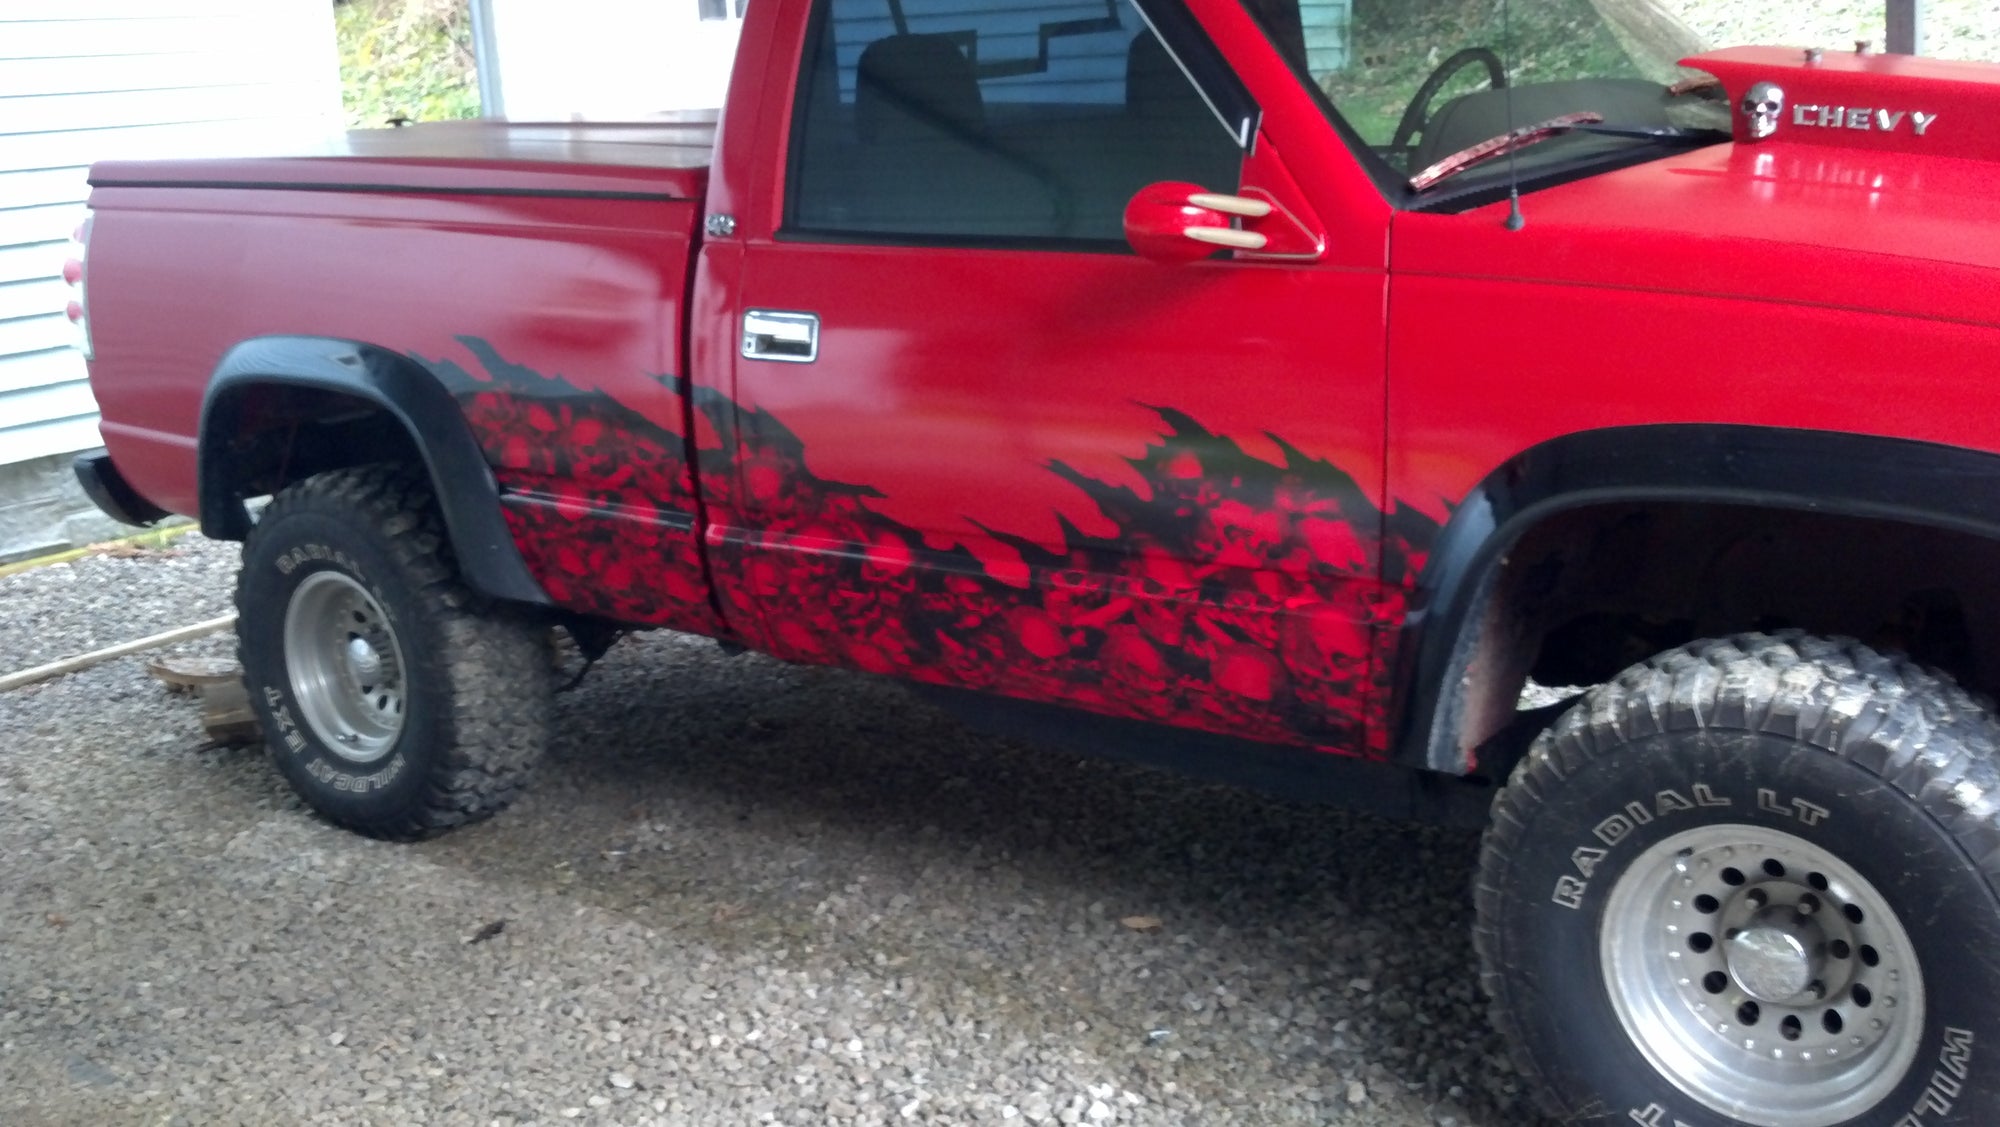 red wave of skulls vinyl half wrap decal on the bottom half of a red pick up truck